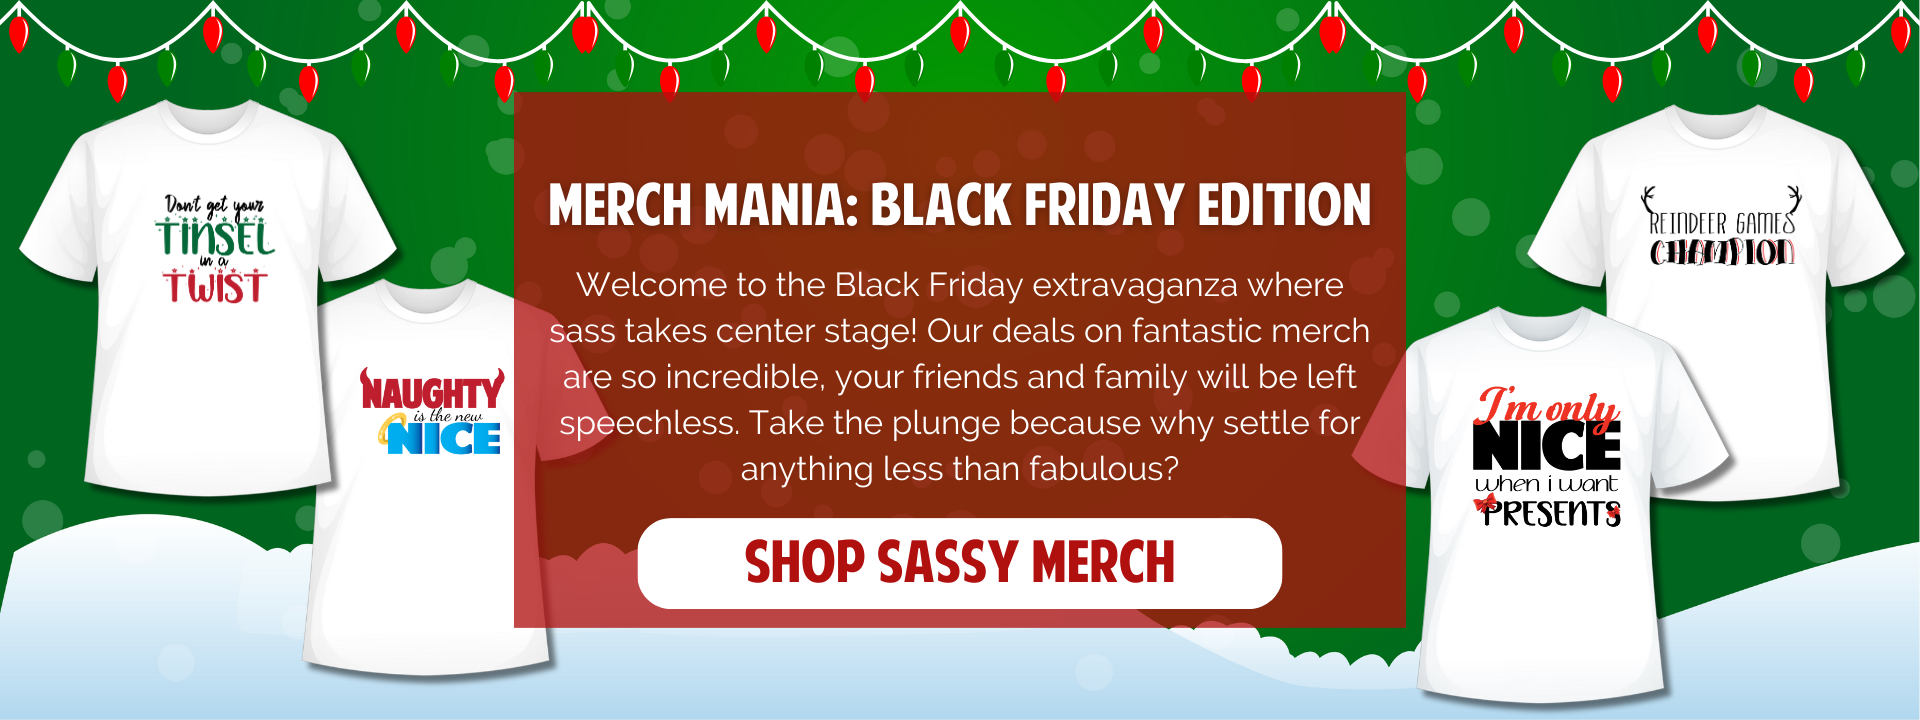 thought merch black friday banners